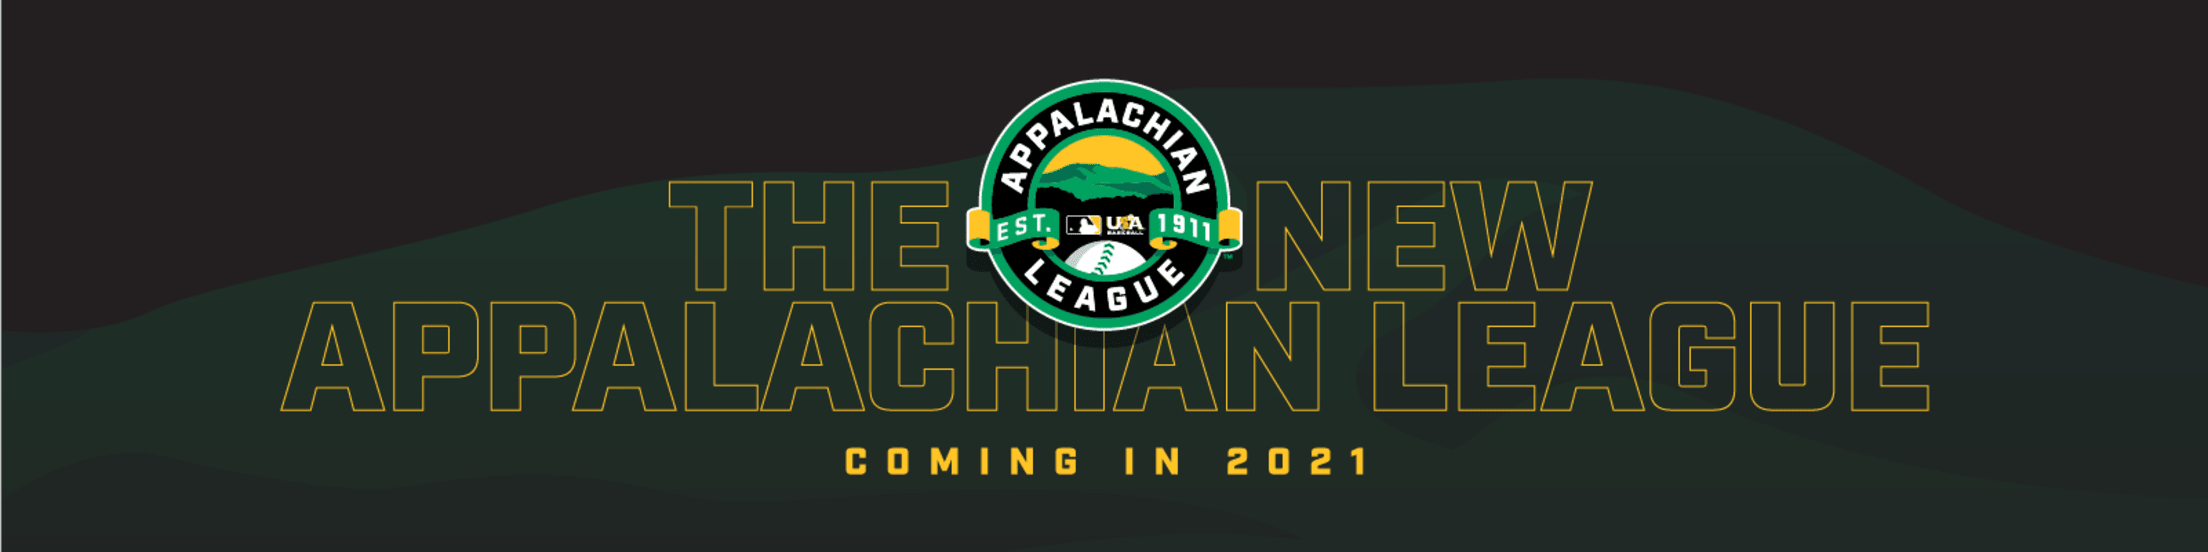 New Vision for the Appalachian League